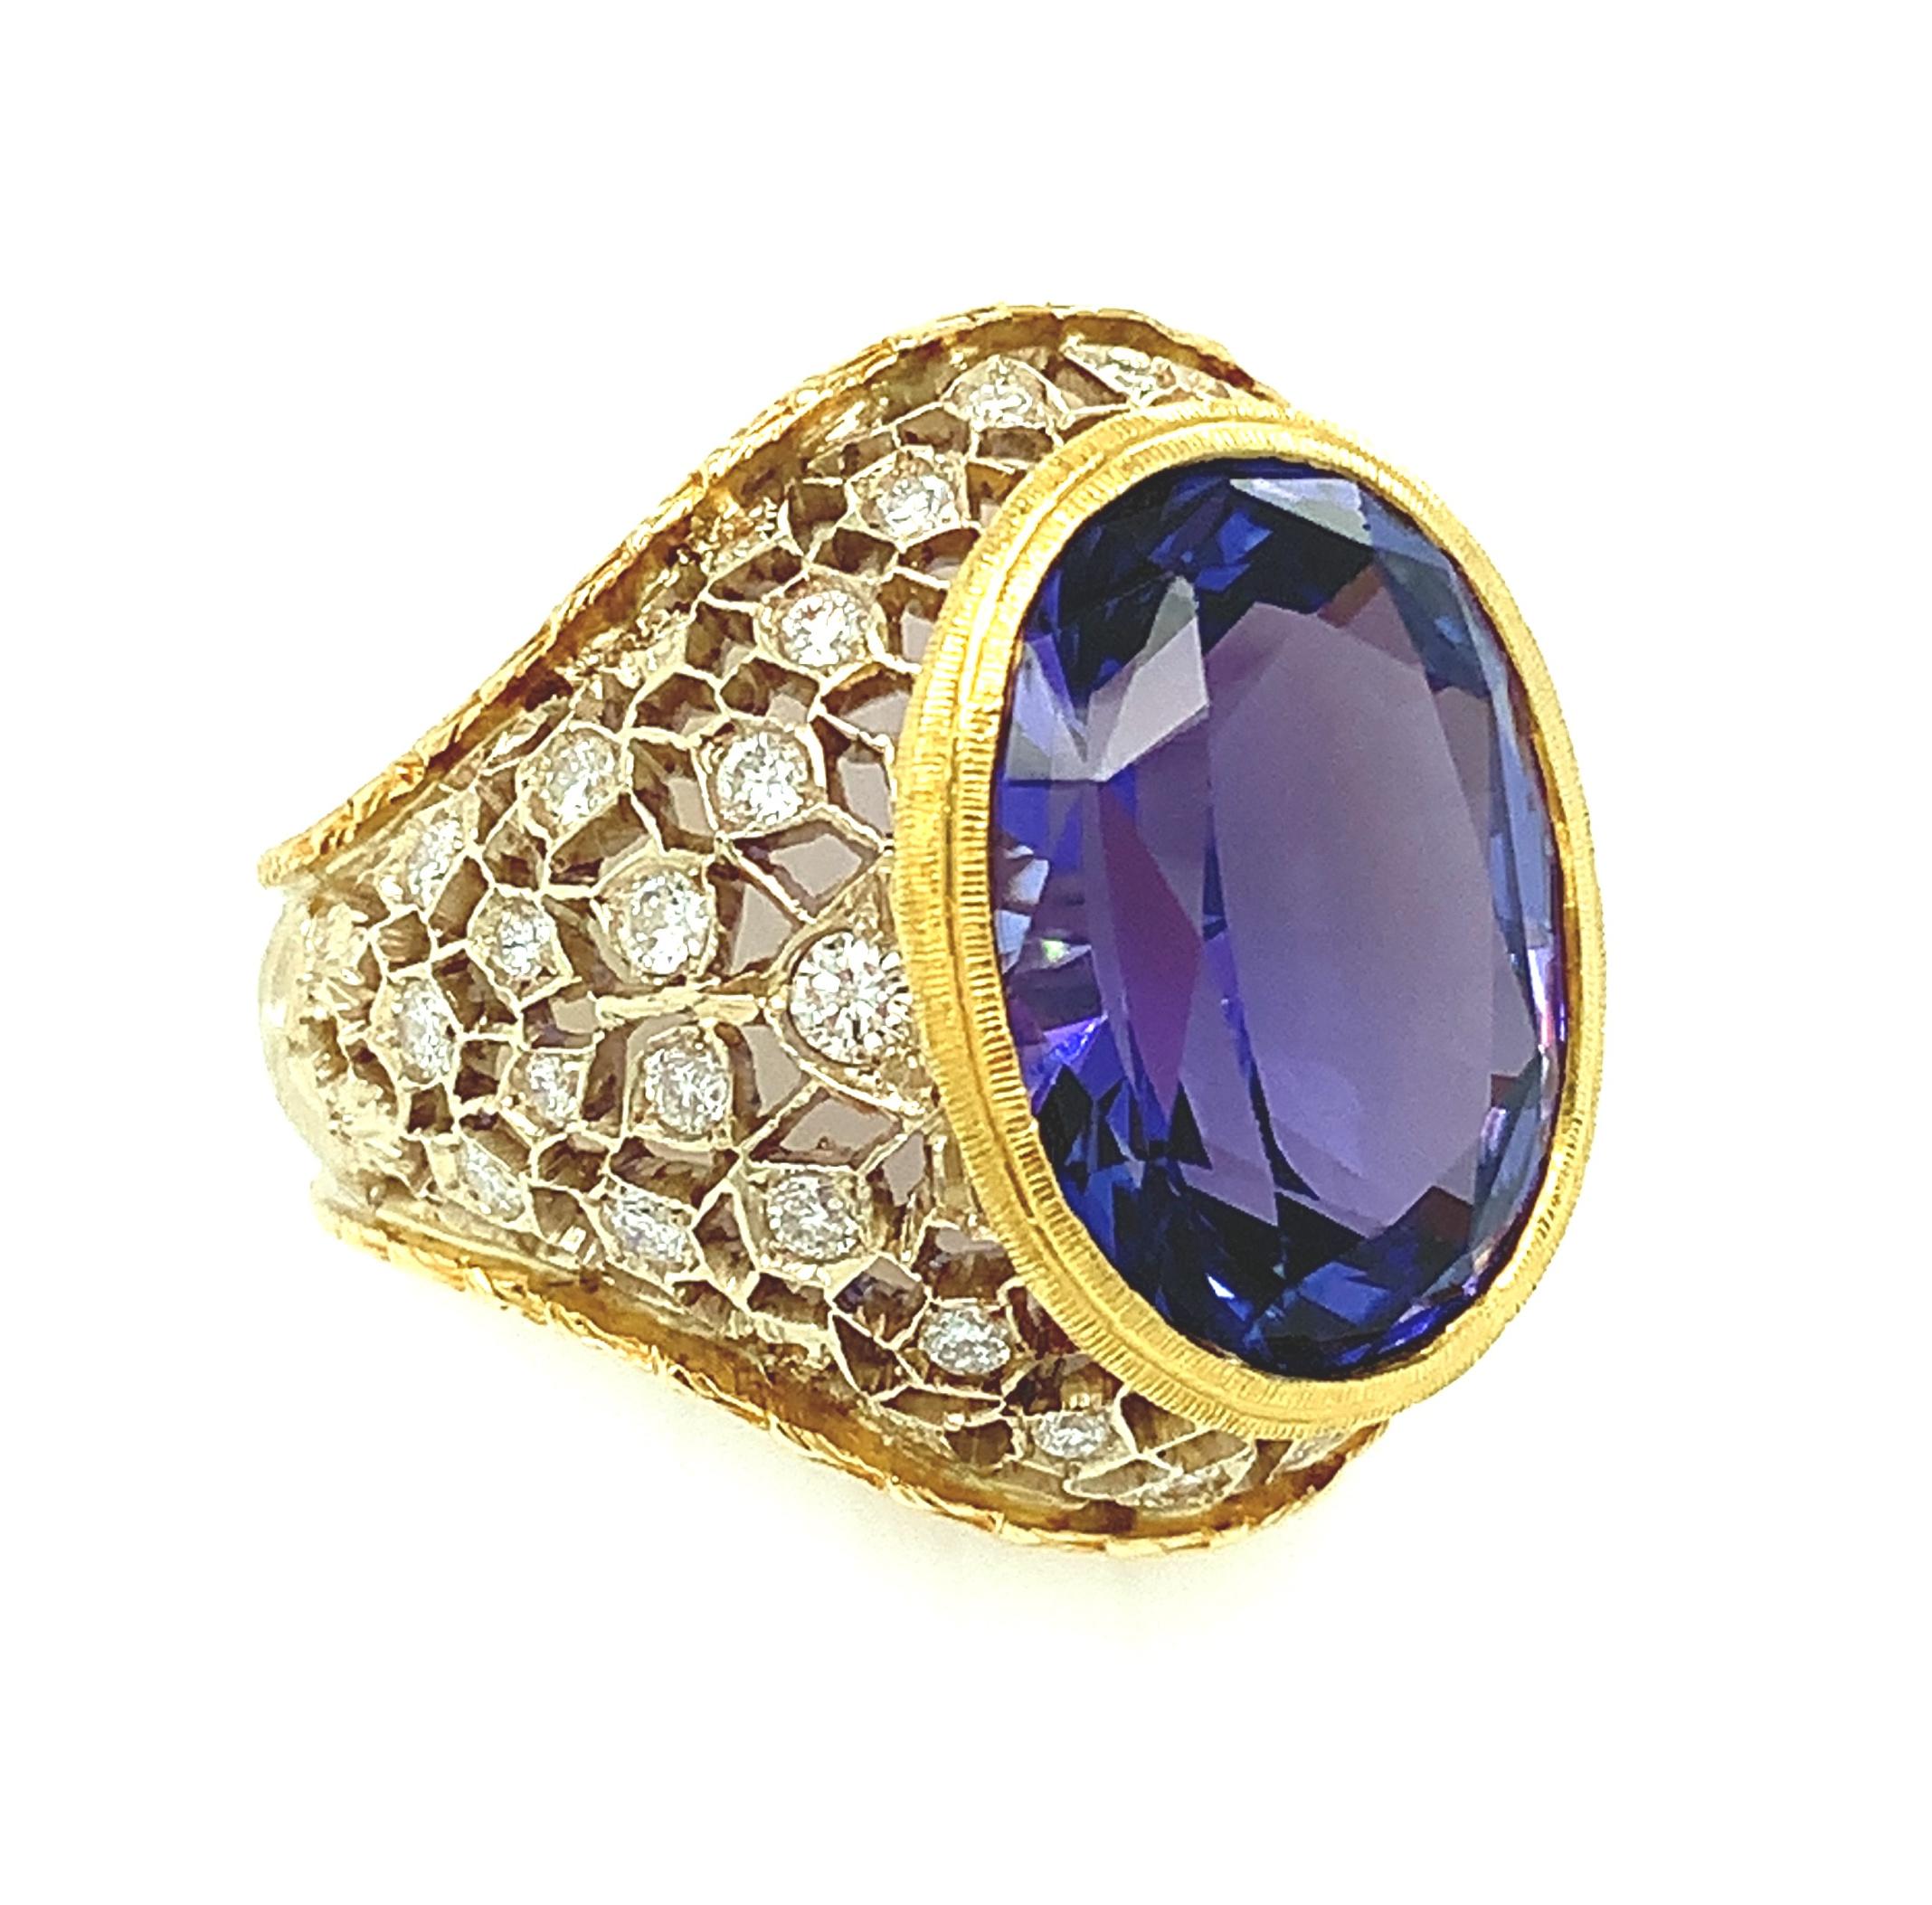 Oval Cut 8.25 Carat Tanzanite and Diamond Florentine Cocktail Ring in 18k Gold For Sale